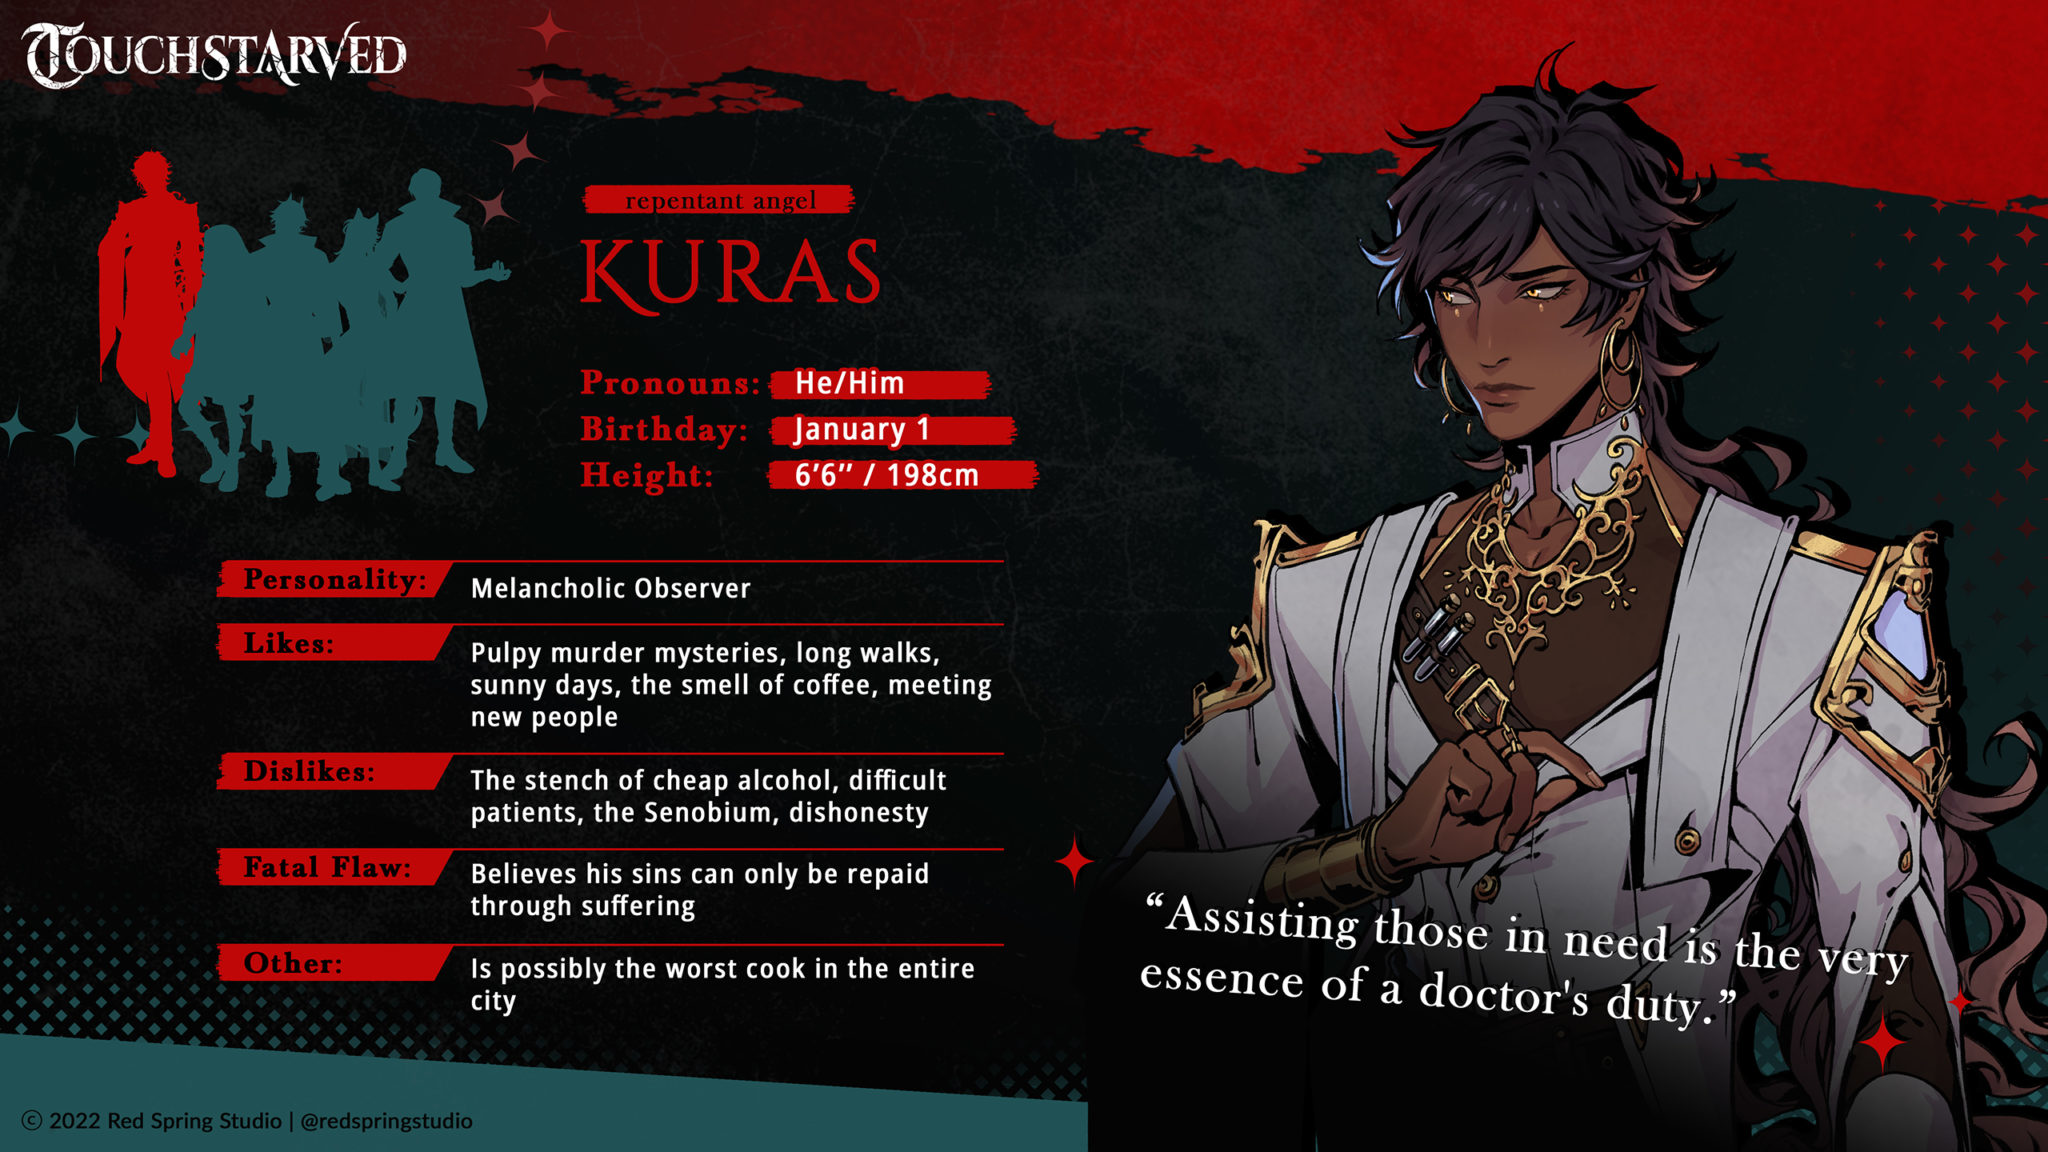 KURAS
Pronouns: He/Him
Birthday: January 1
Height (in + cm): 6’6’’ | 198 cm
Personality: Melancholic Observer
Likes: Pulpy murder mysteries, long walks, sunny days, the smell of coffee, meeting new people
Dislikes: The stench of cheap alcohol, difficult patients, the Senobium, dishonesty
Fatal Flaw: Believes his sins can only be repaid through suffering
Extra: Is possibly the worst cook in the entire city
Quote: “Assisting those in need is the very essence of a doctor's duty.”